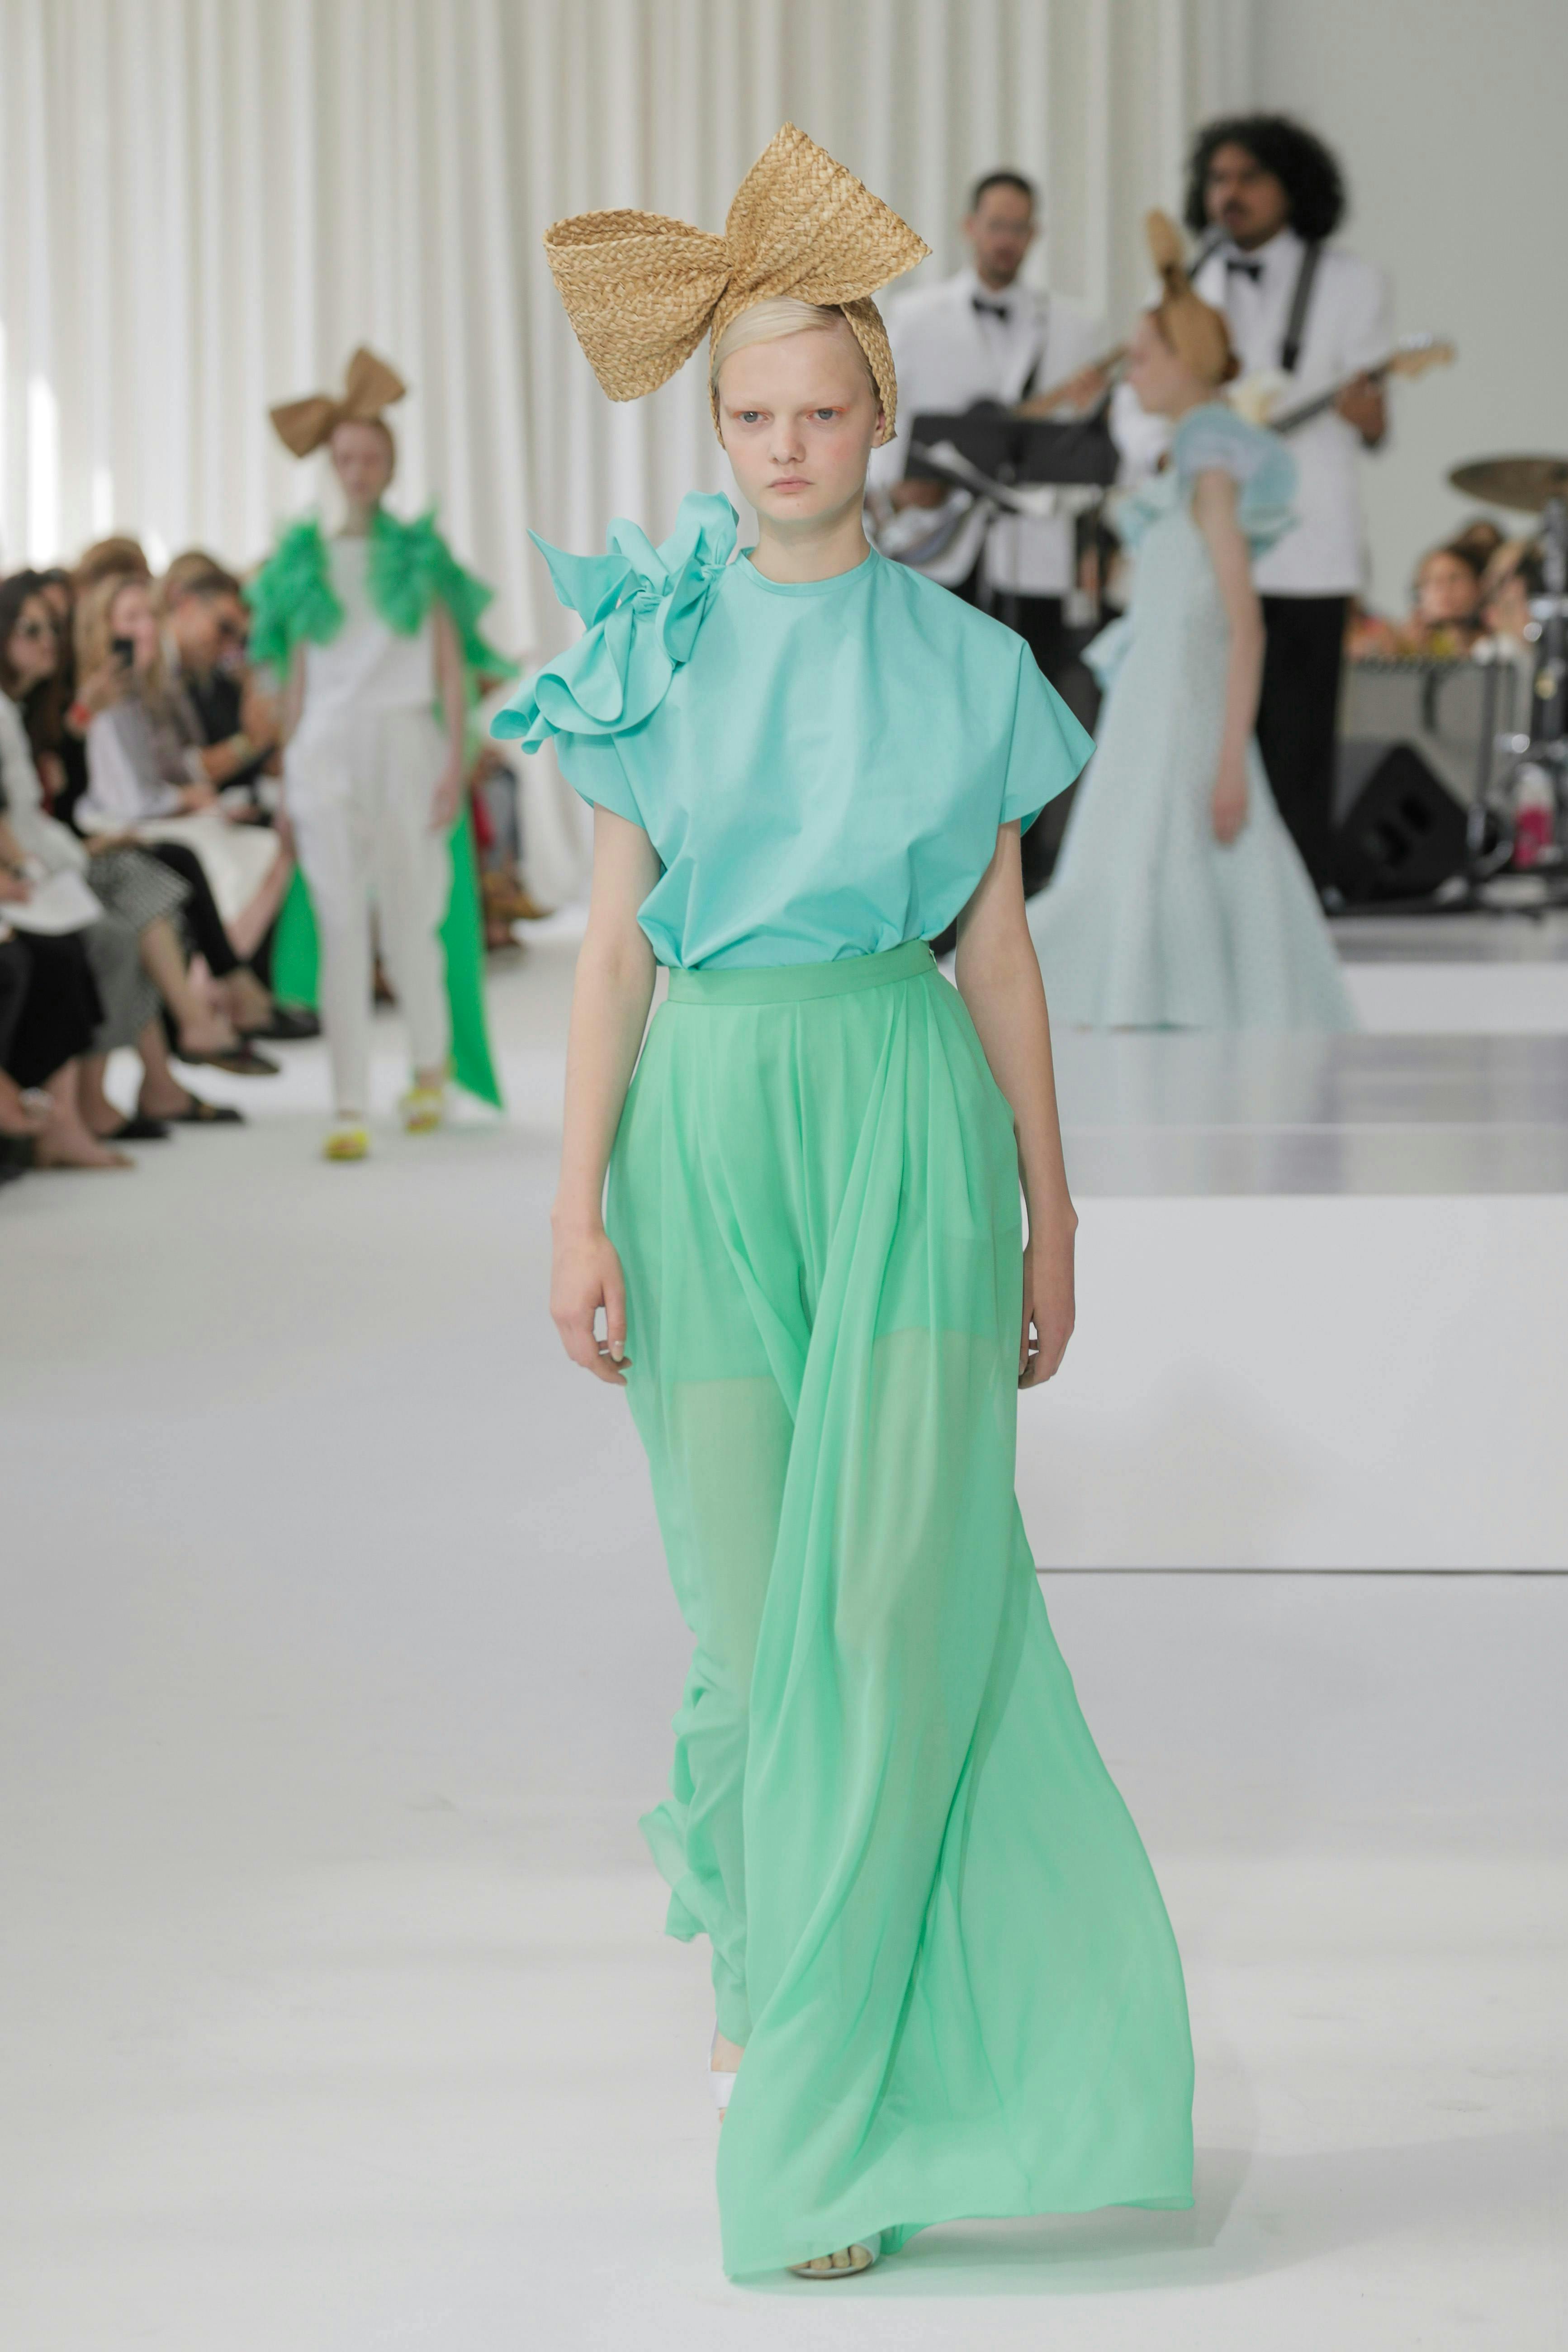 2018 catwalk delpozo fashion new york ny show spring ss18 summer clothing apparel hat robe evening dress gown person wedding gown wedding